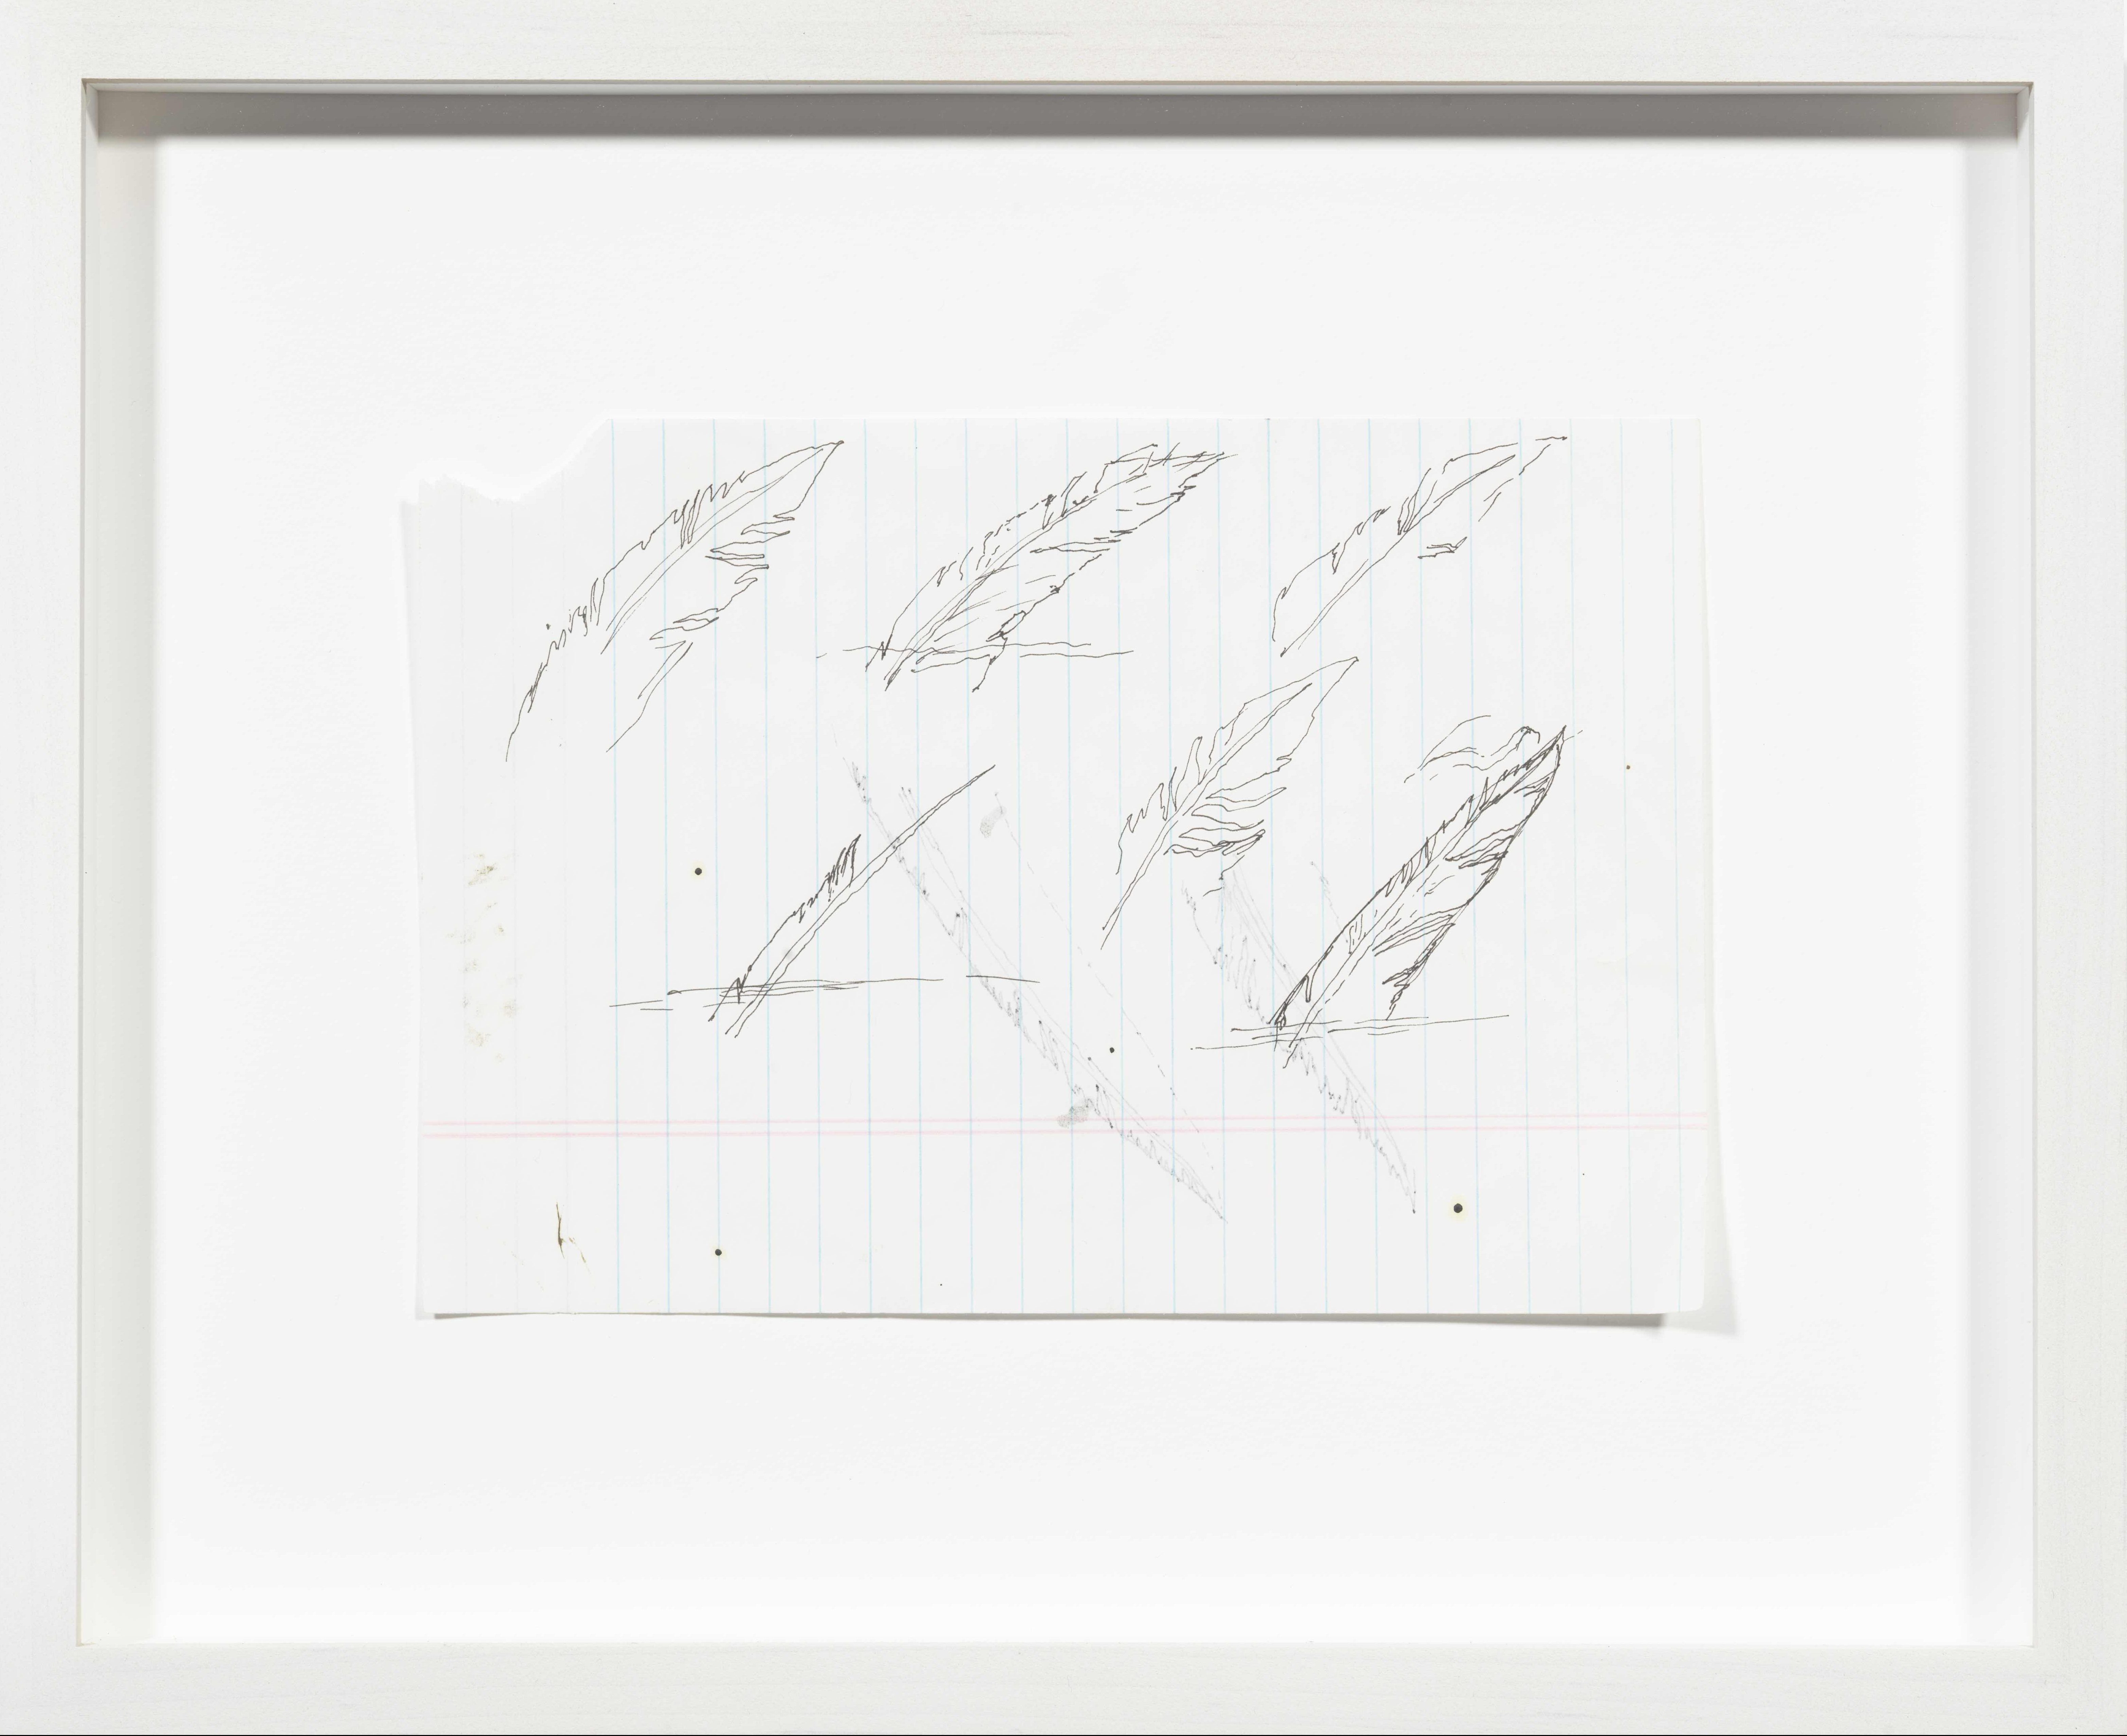 Untitled (Candle Sketch 2 - Feathers), 2004